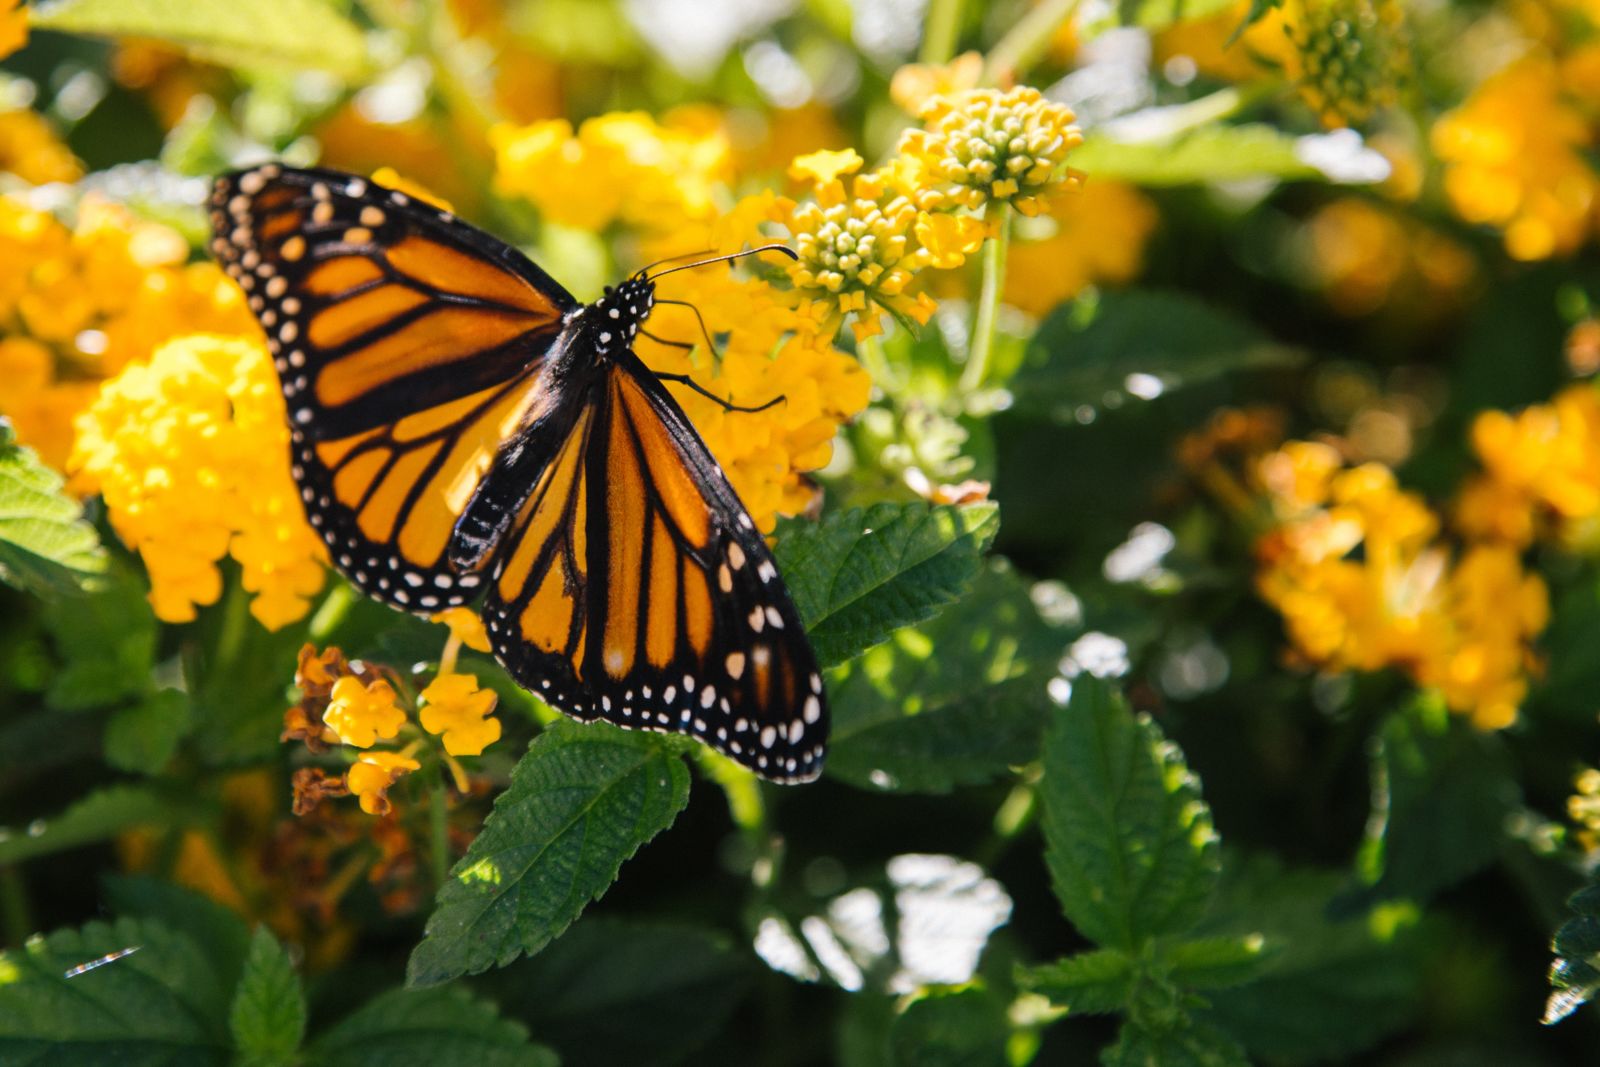 Pismo Beach butterfly grove sees thousands of monarchs